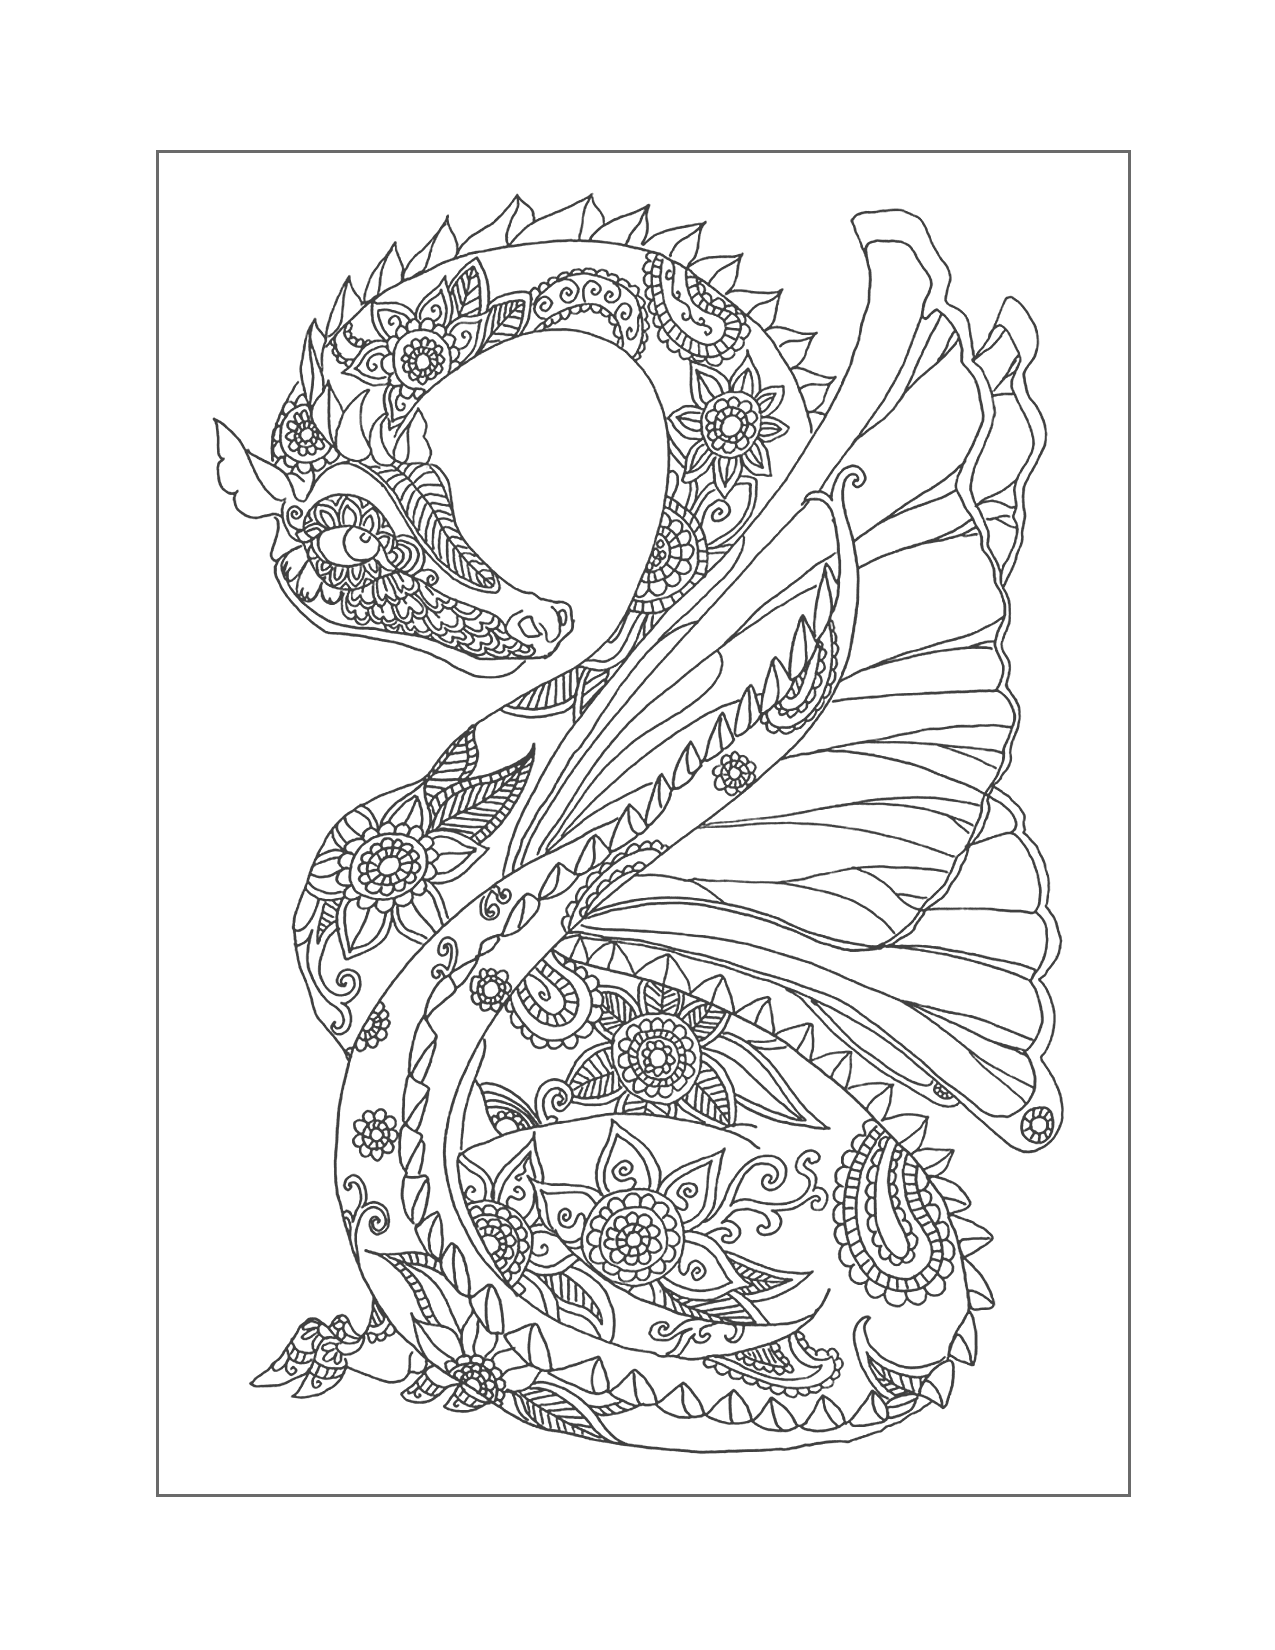 Printable Dragon Coloring Pages For Adults